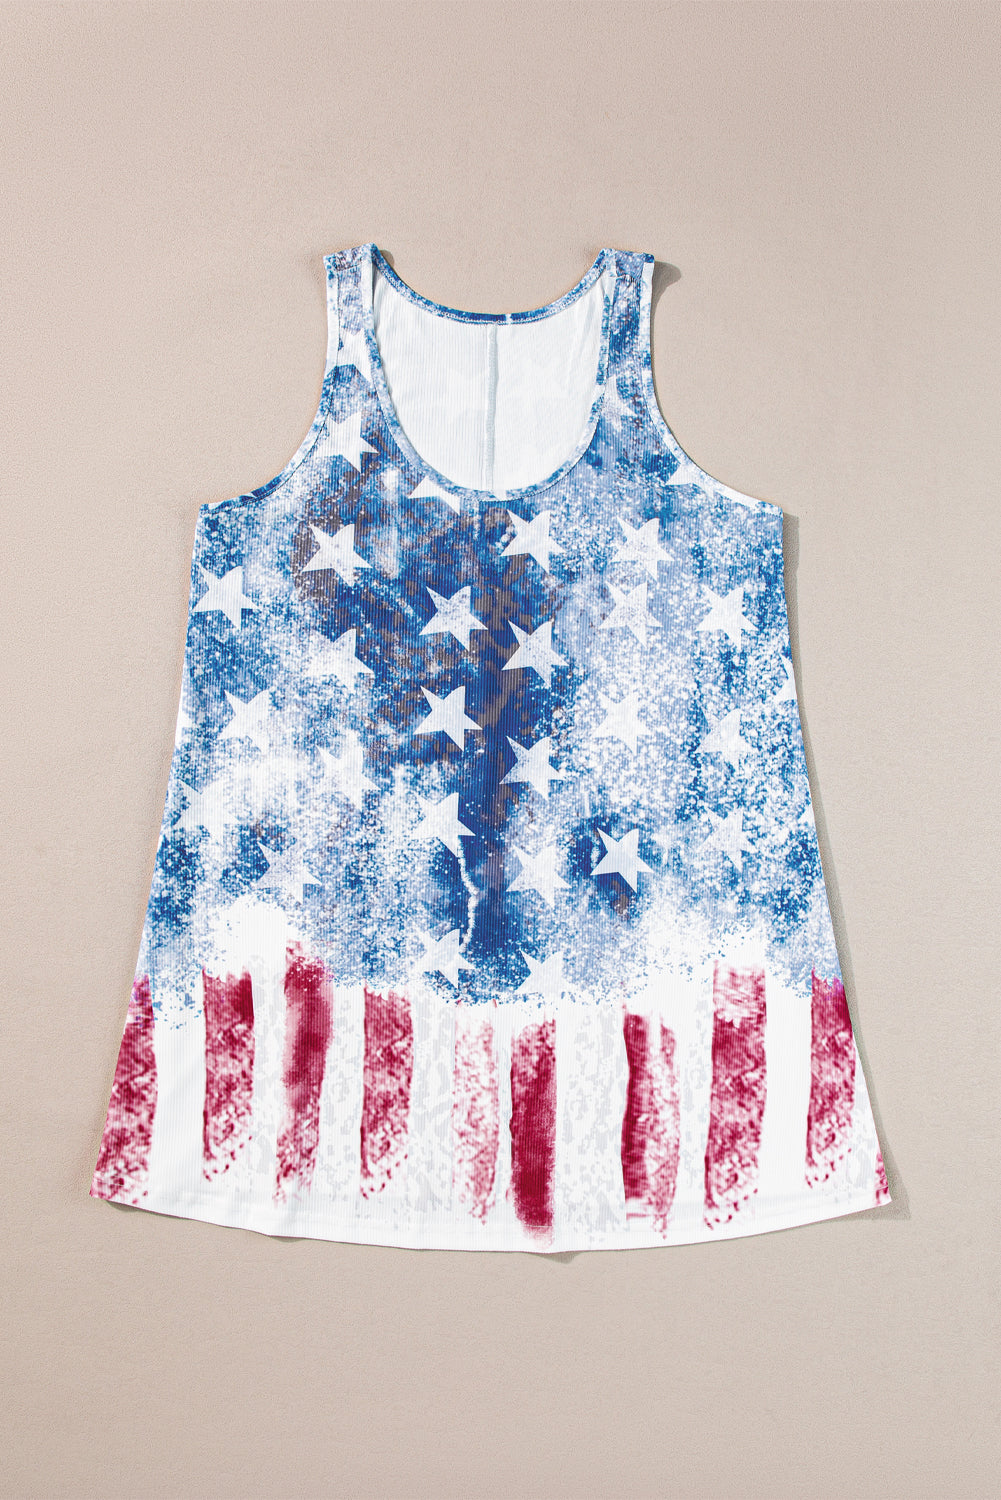 a tank top with an american flag design on it